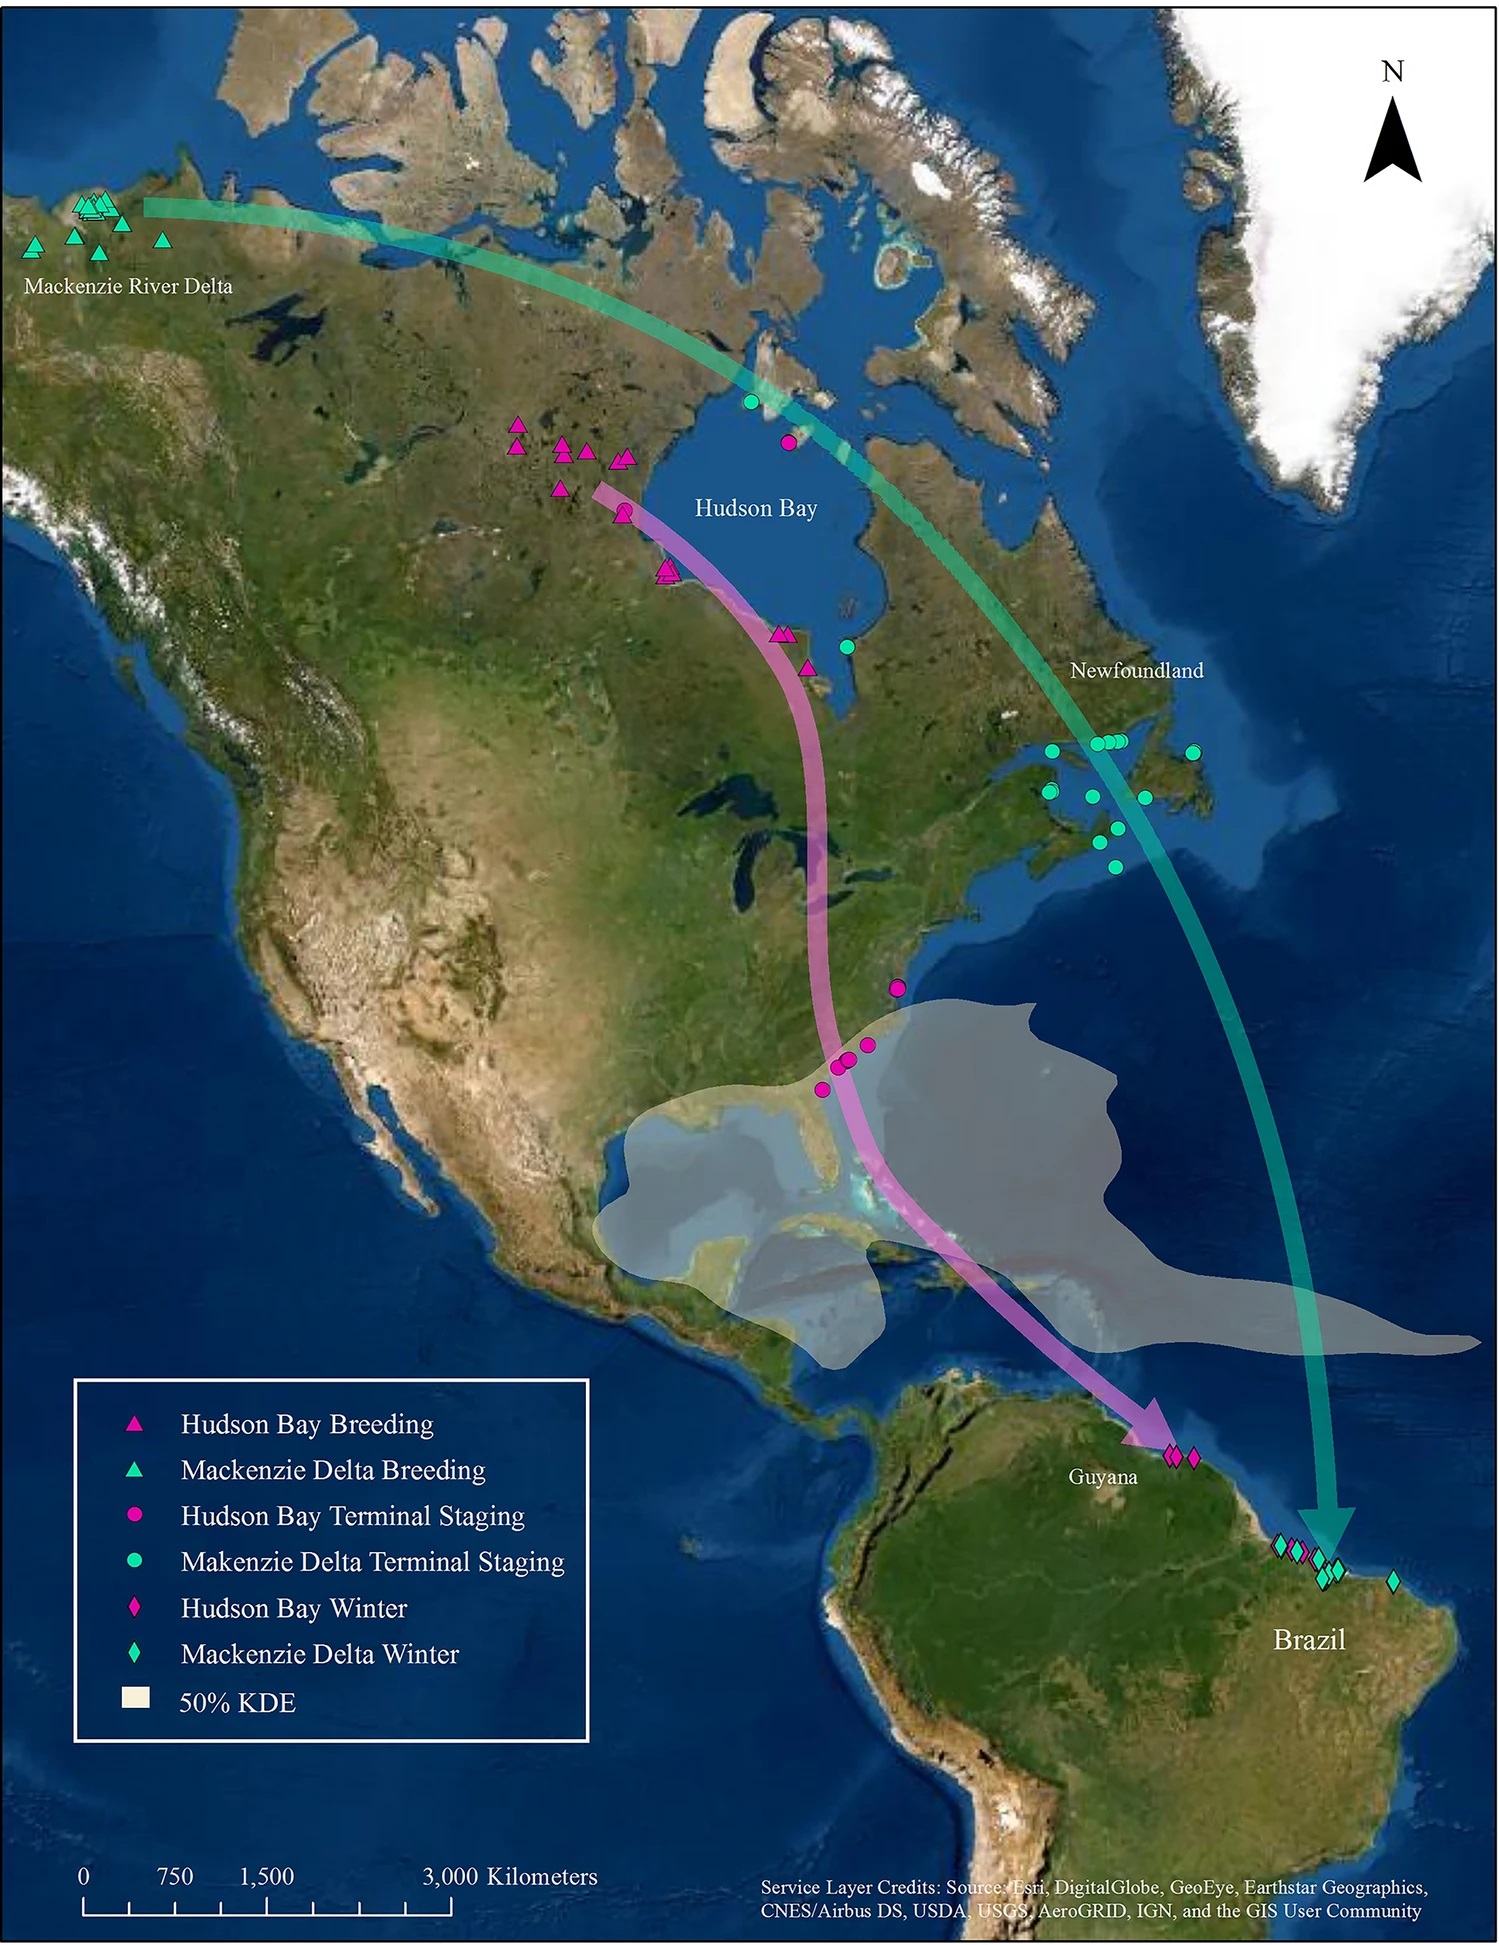 Schematic routes for both whimbrel populations